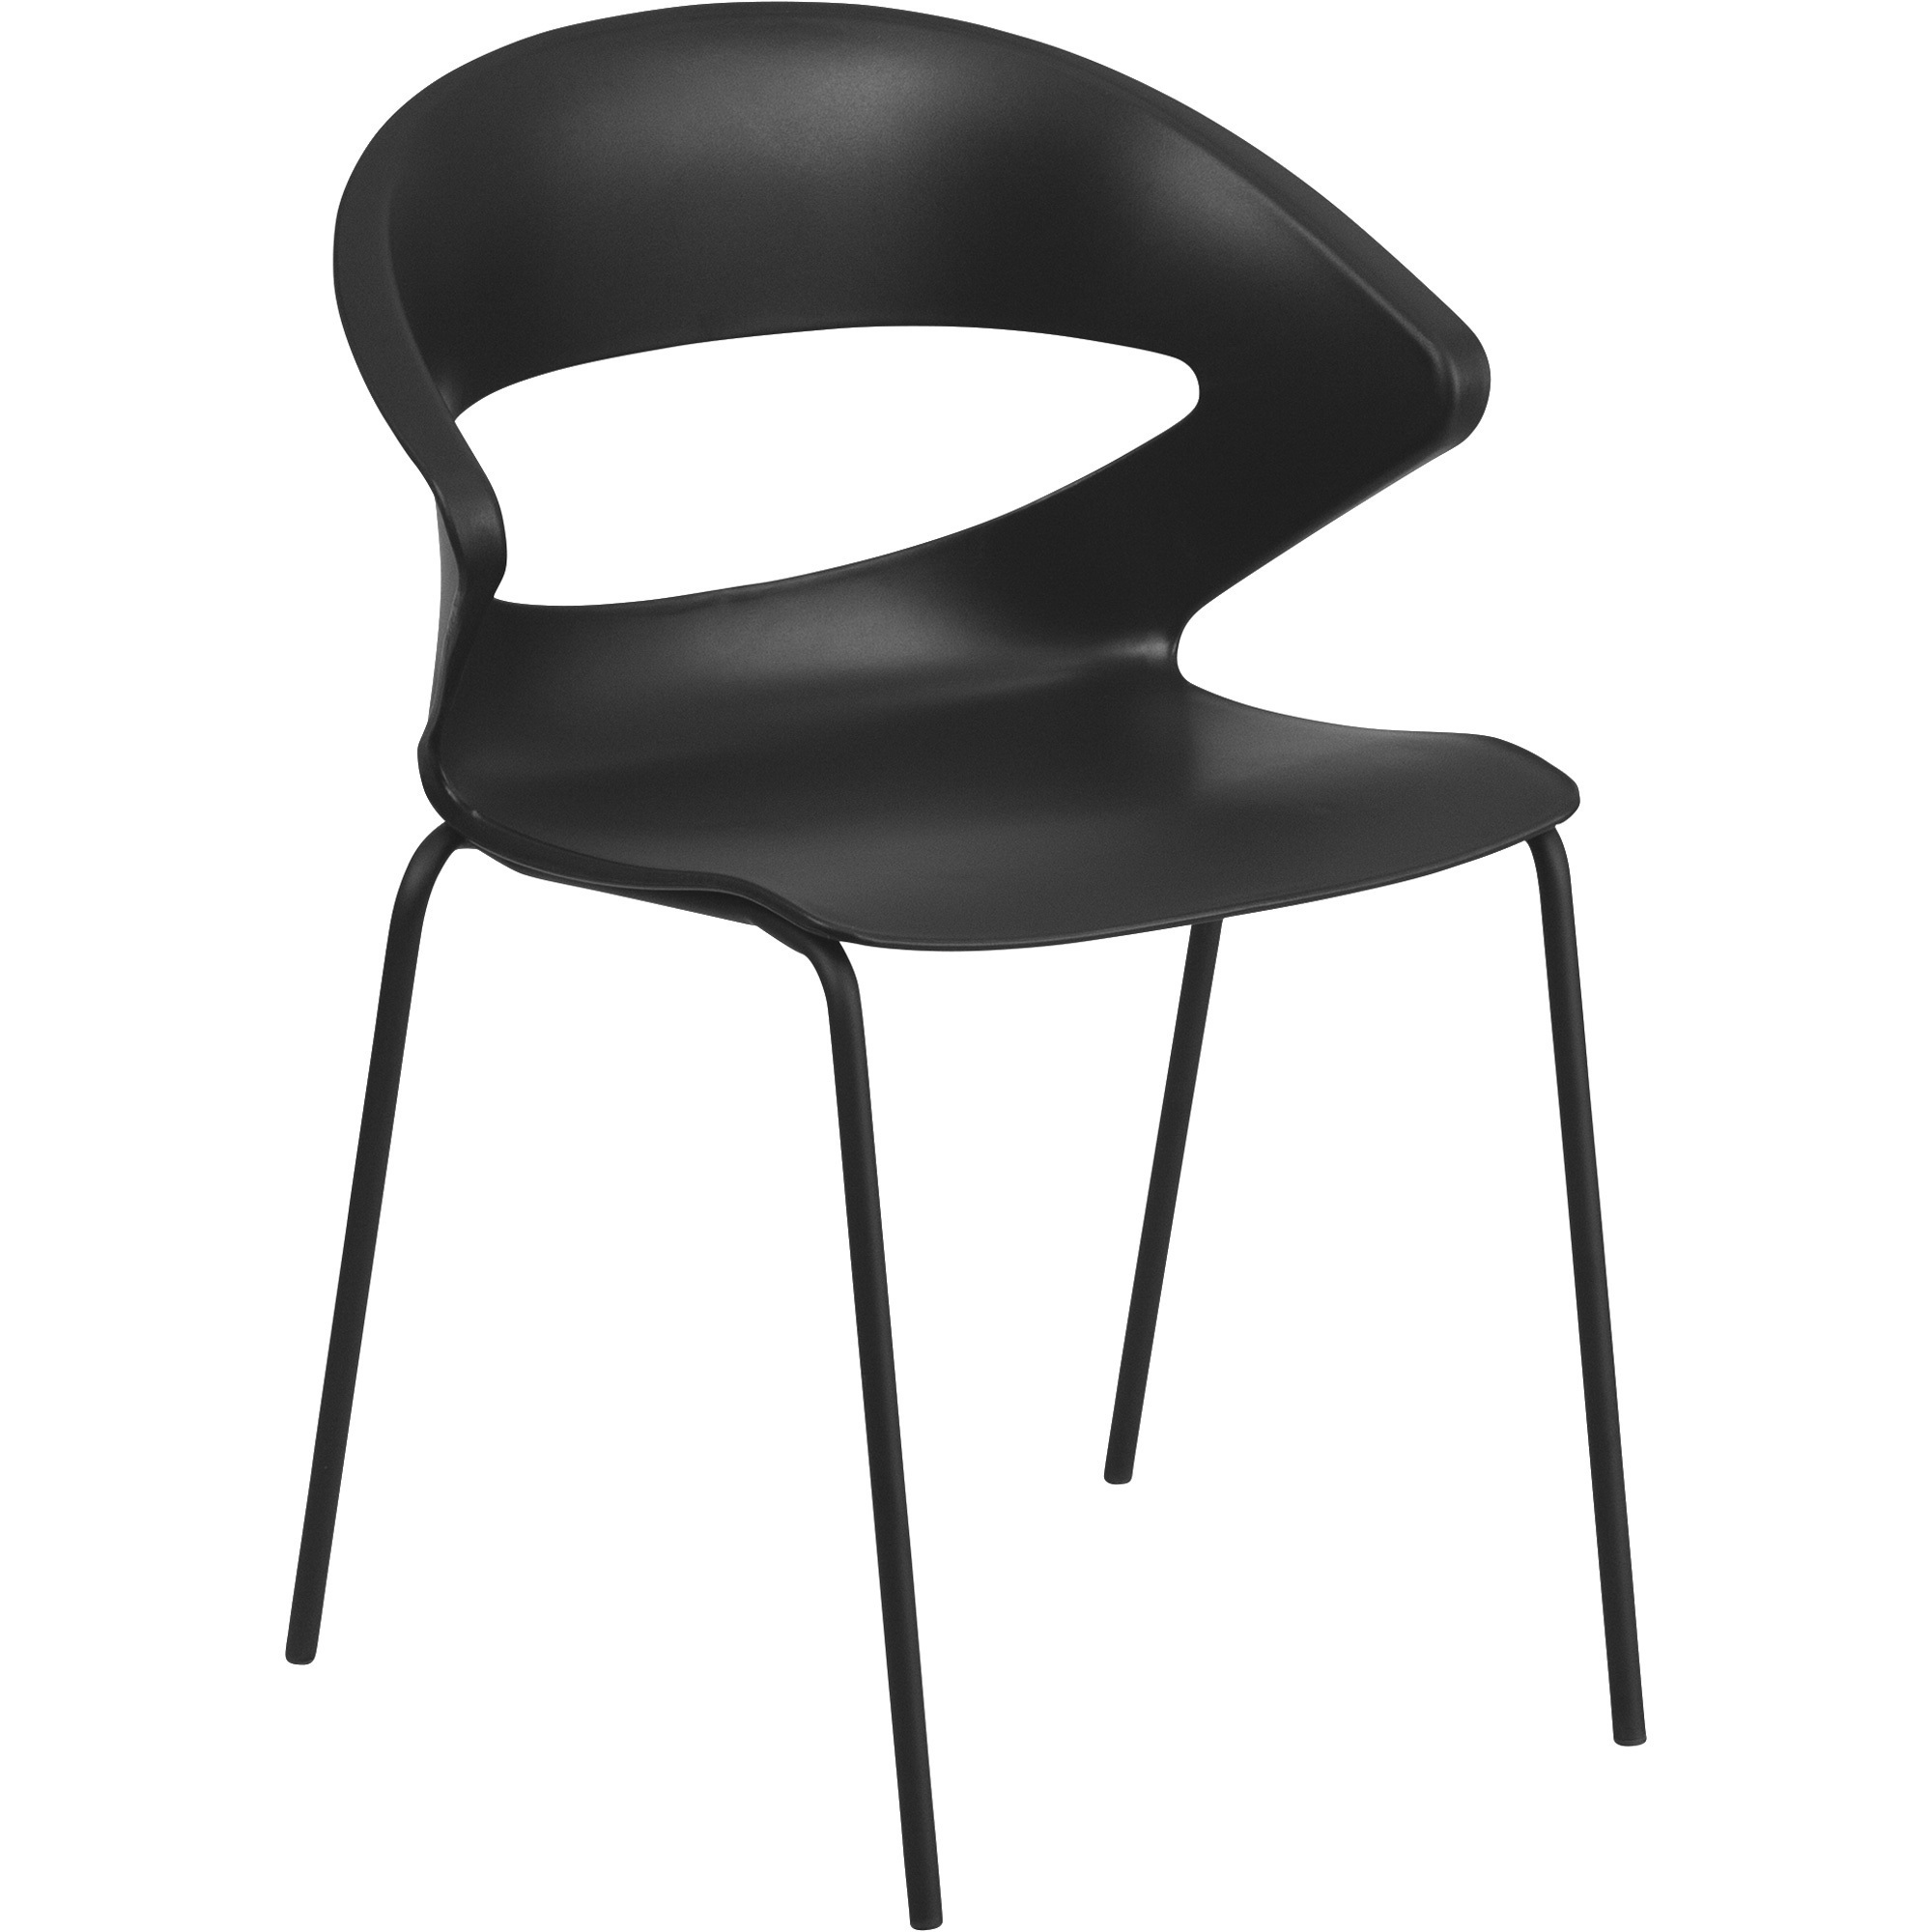 Flash Furniture Plastic Cafe-Style Stacking Chair â Black, 440-Lb. Capacity, 23Inch W x 18Inch D x 31Inch H, Model RUT4BK